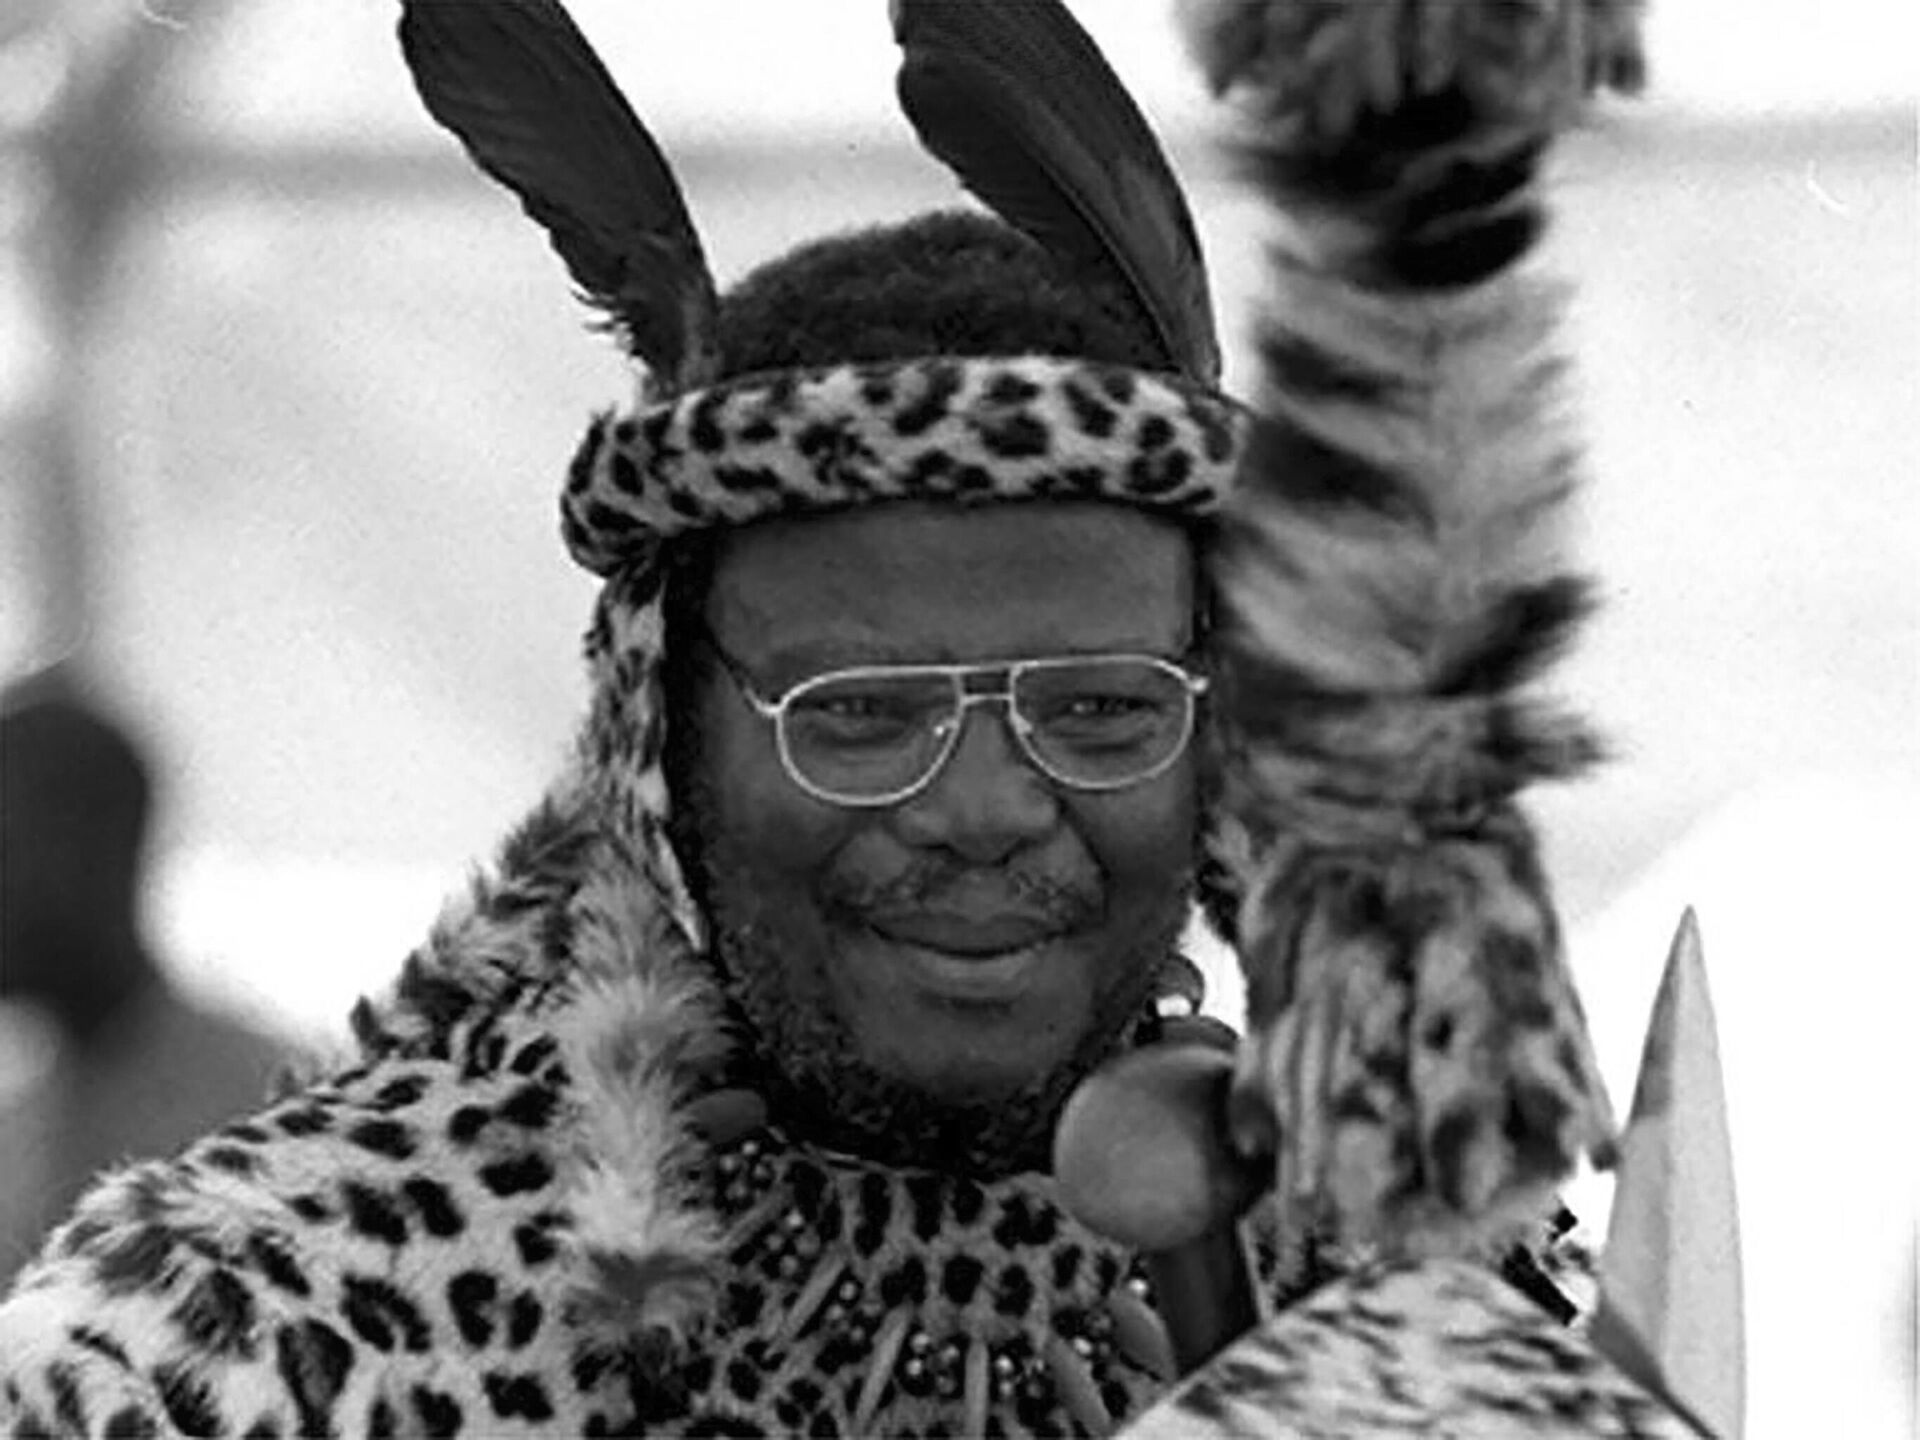 South African politician and traditional minister of South Africa's large Zulu ethnic group, Prince Mangosuthu Buthelezi, in traditional dress March 26, 2009 - Sputnik Africa, 1920, 24.12.2023